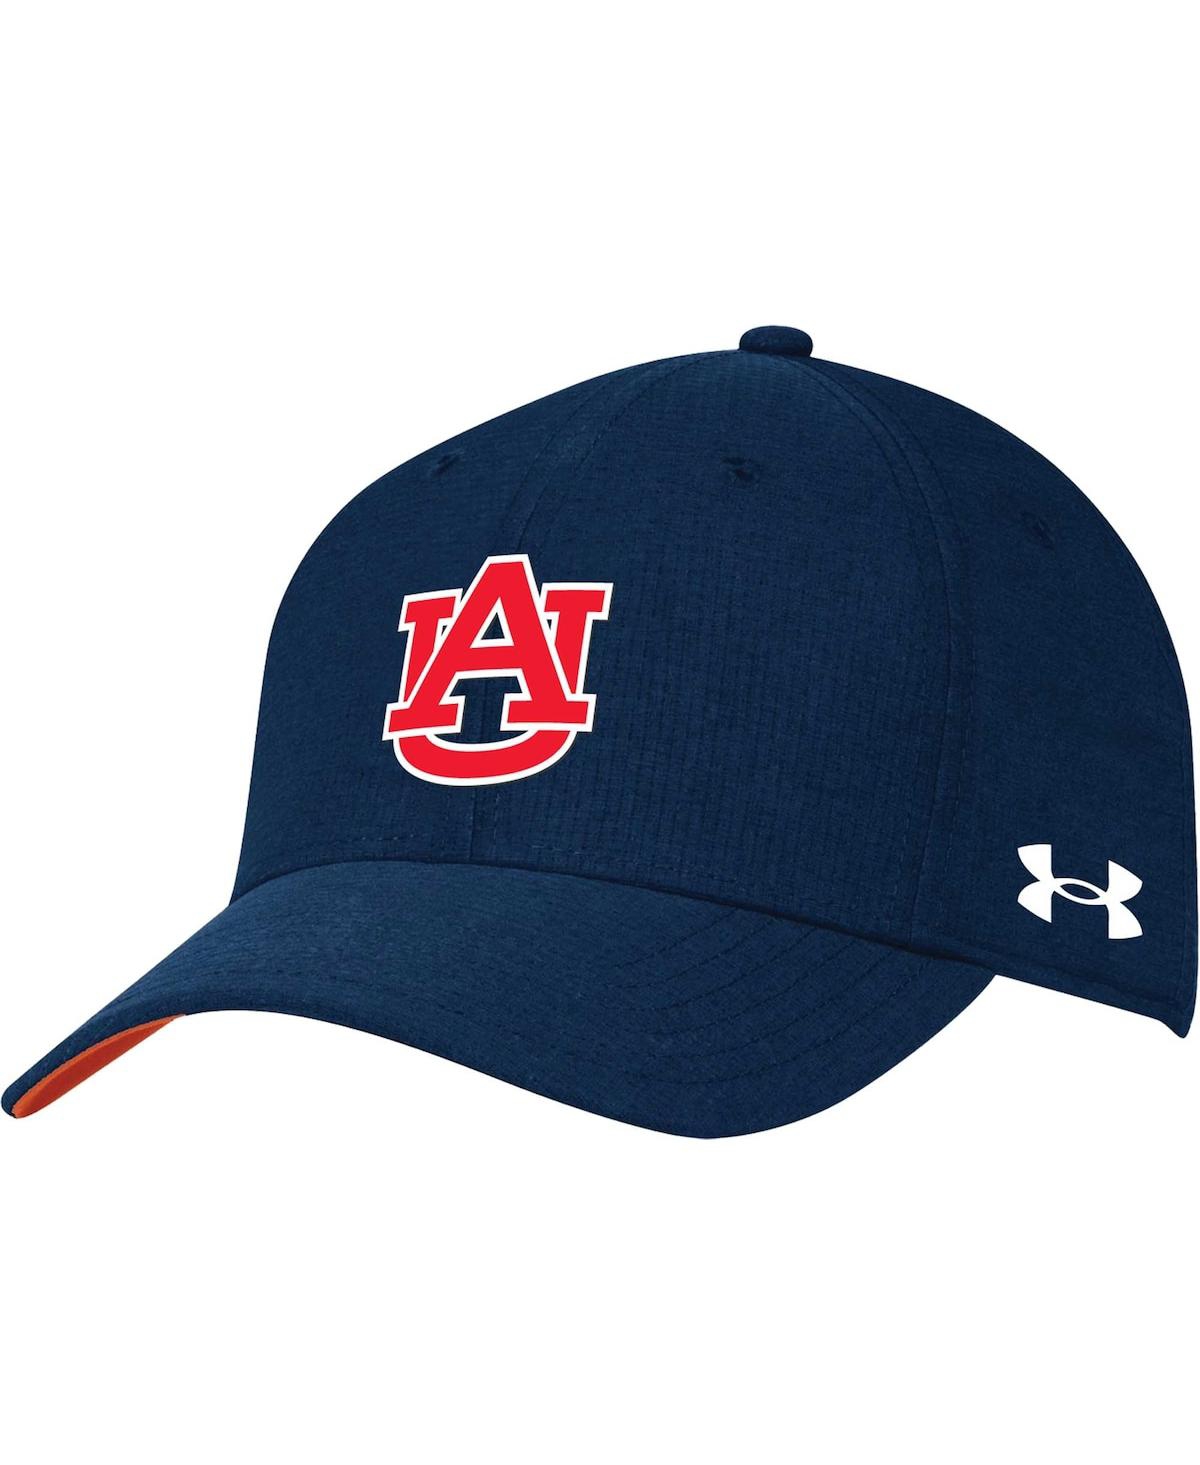 Under Armour Men's  Navy Auburn Tigers Coolswitch Airvent Adjustable Hat